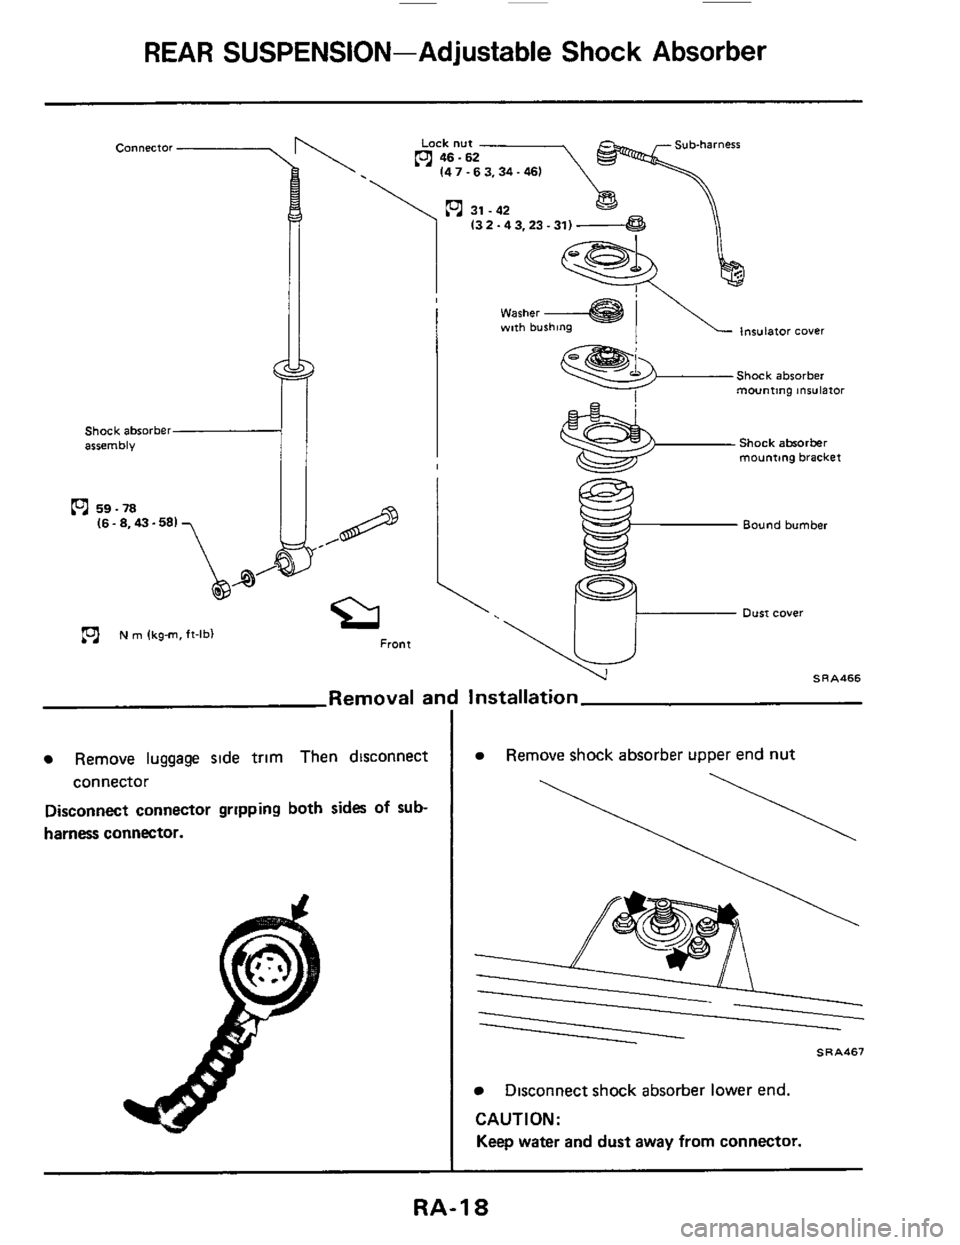 NISSAN 300ZX 1984 Z31 Rear Suspension User Guide ~  ~  ~ REAR 
SUSPENSION-Adjustable Shock Absorber 
Shock  absorber A 
assembly 11 
I Insulator cover I 
Shock  absorber 
mounting  insulator 
Shock abrorber mounting bracket 
Removal an 
Remove lugga